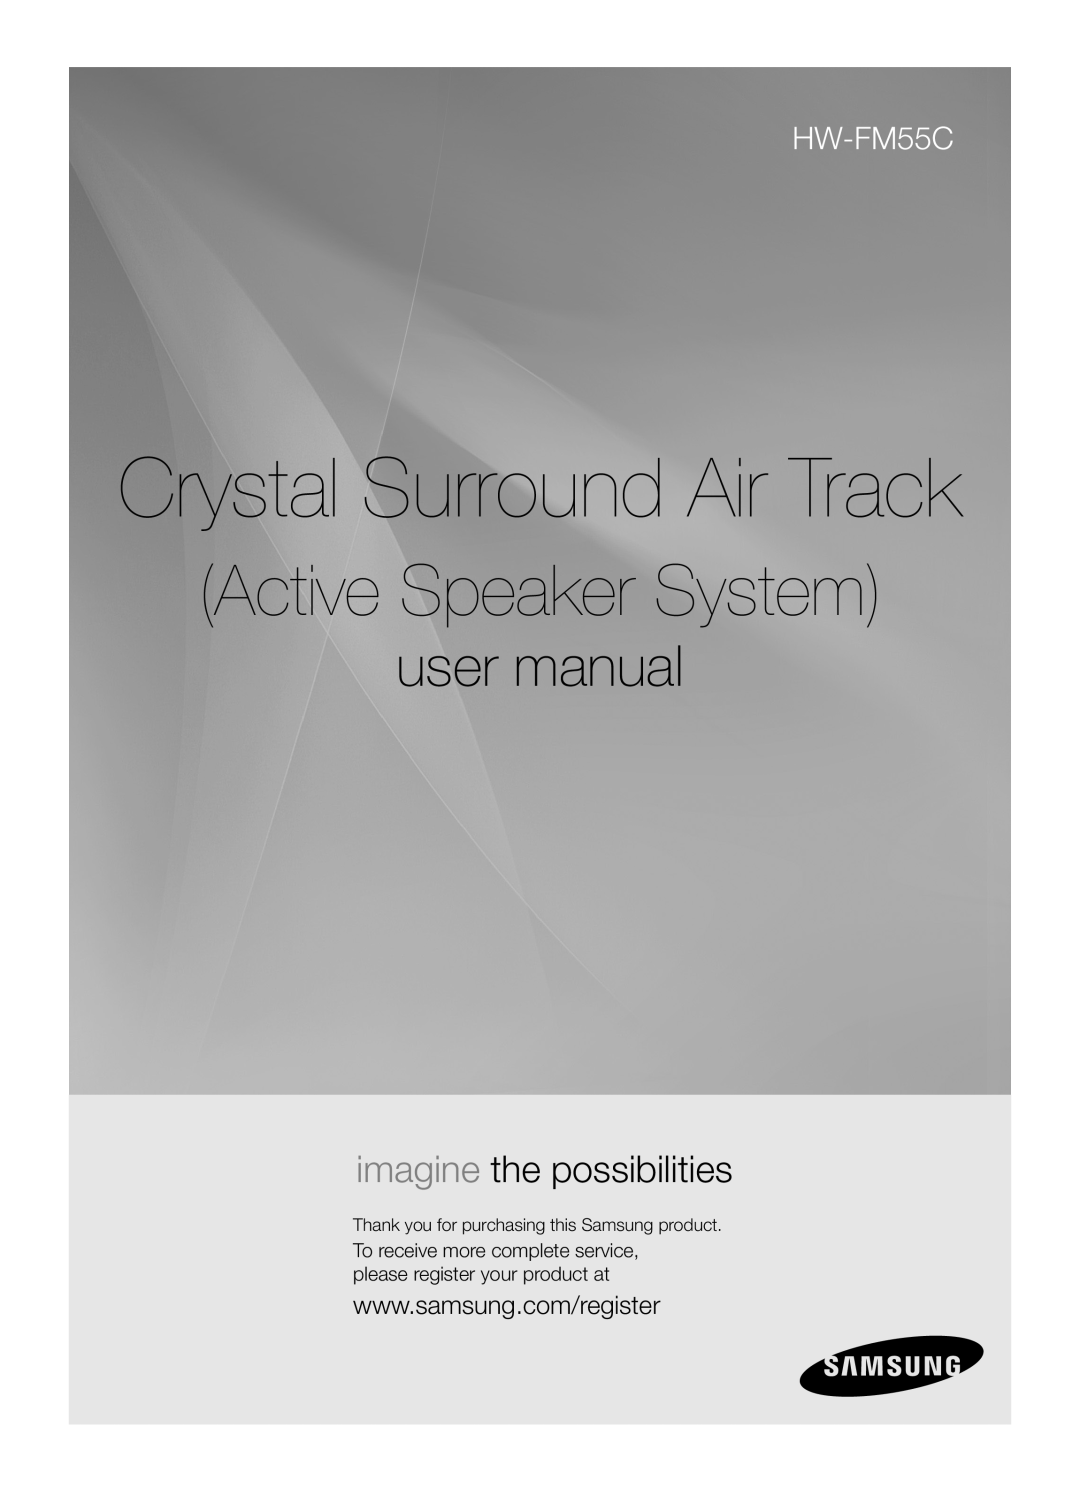 Samsung HW-FM55C user manual Crystal Surround Air Track, Active Speaker System, imagine the possibilities 